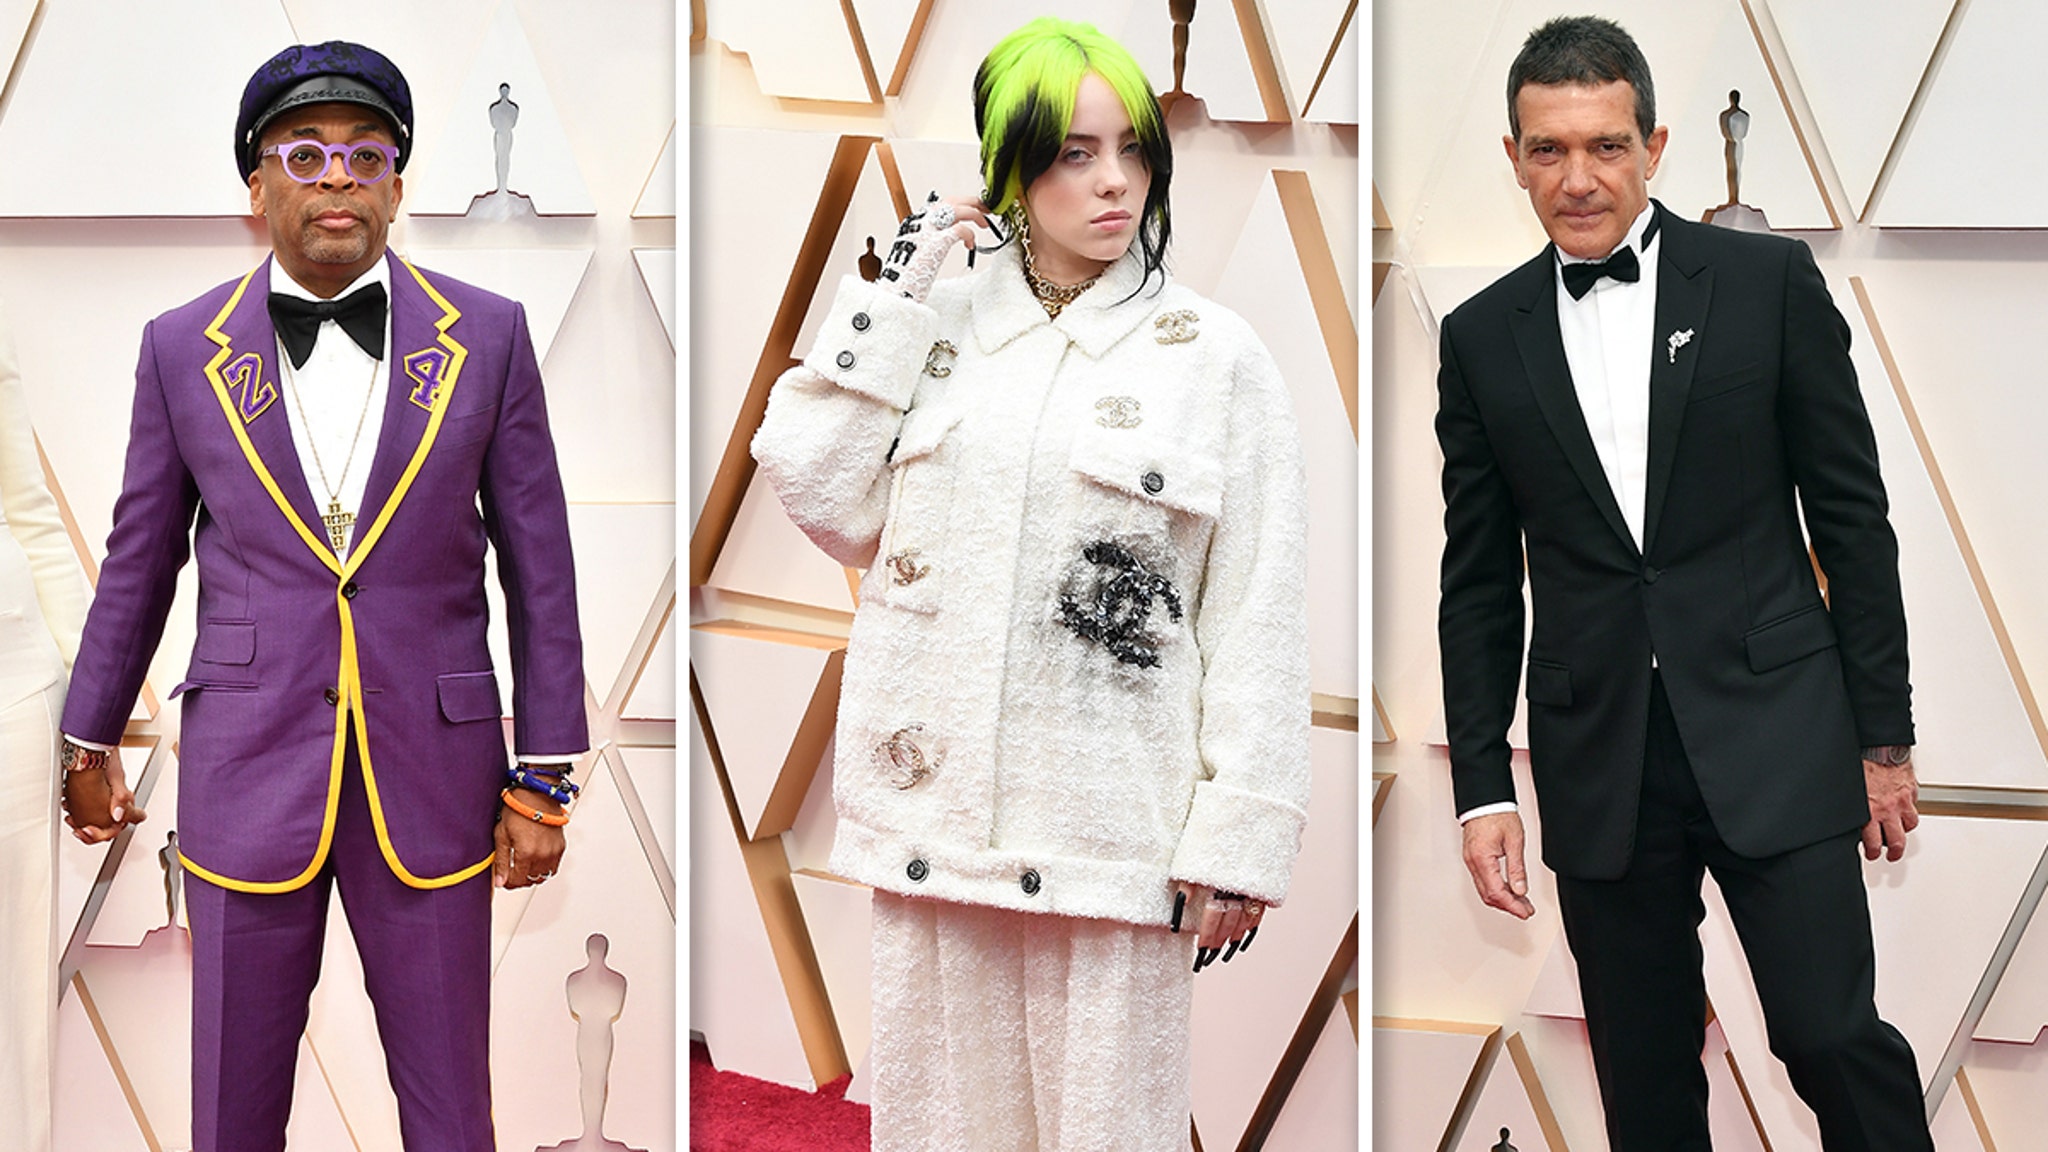 Hollywood's Ready for the 92nd Academy Awards, Outfits Run the Gamut